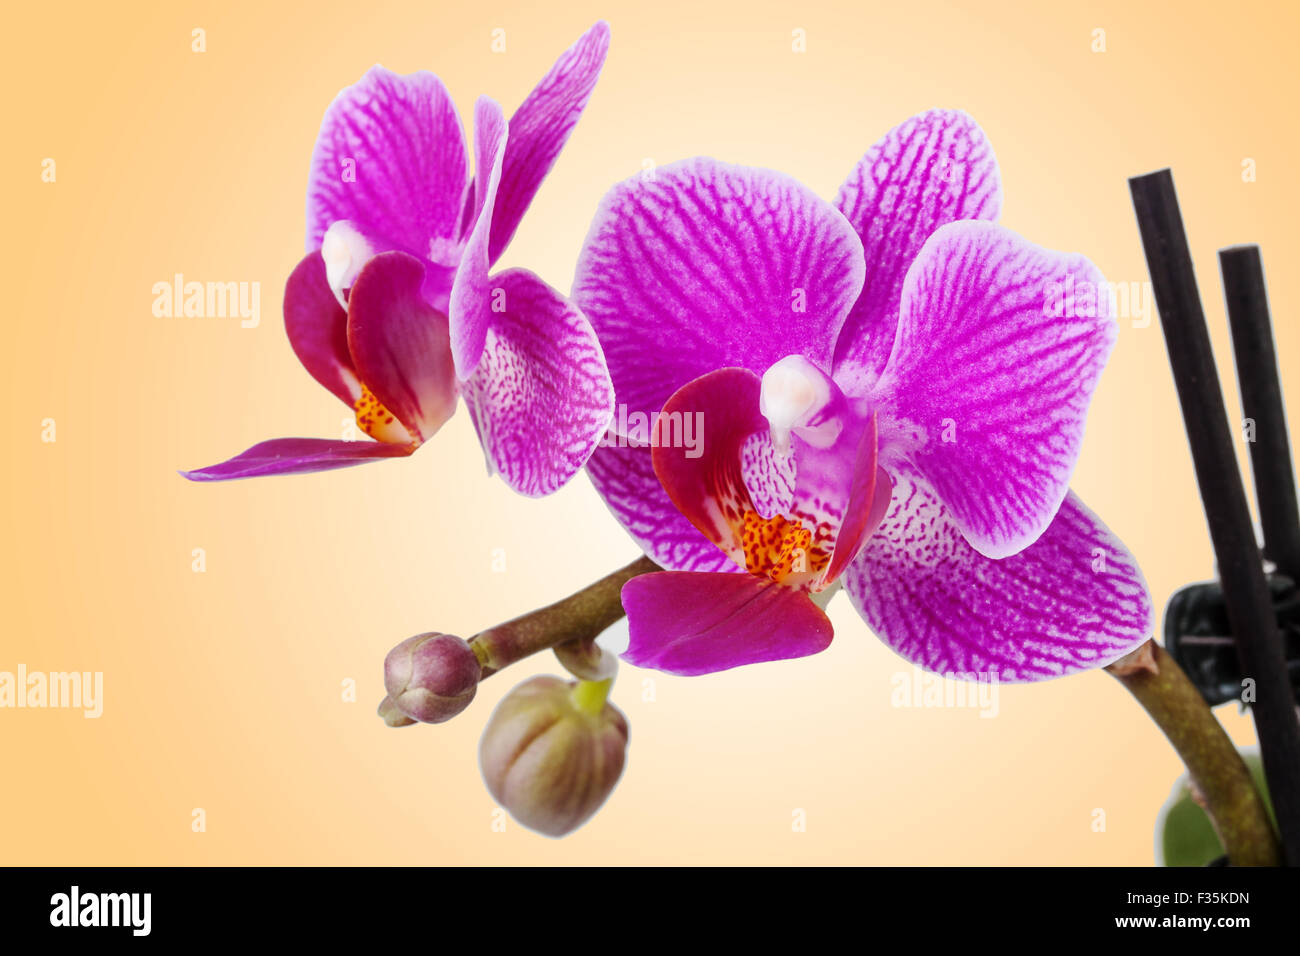 purple orchid on an orange background Stock Photo